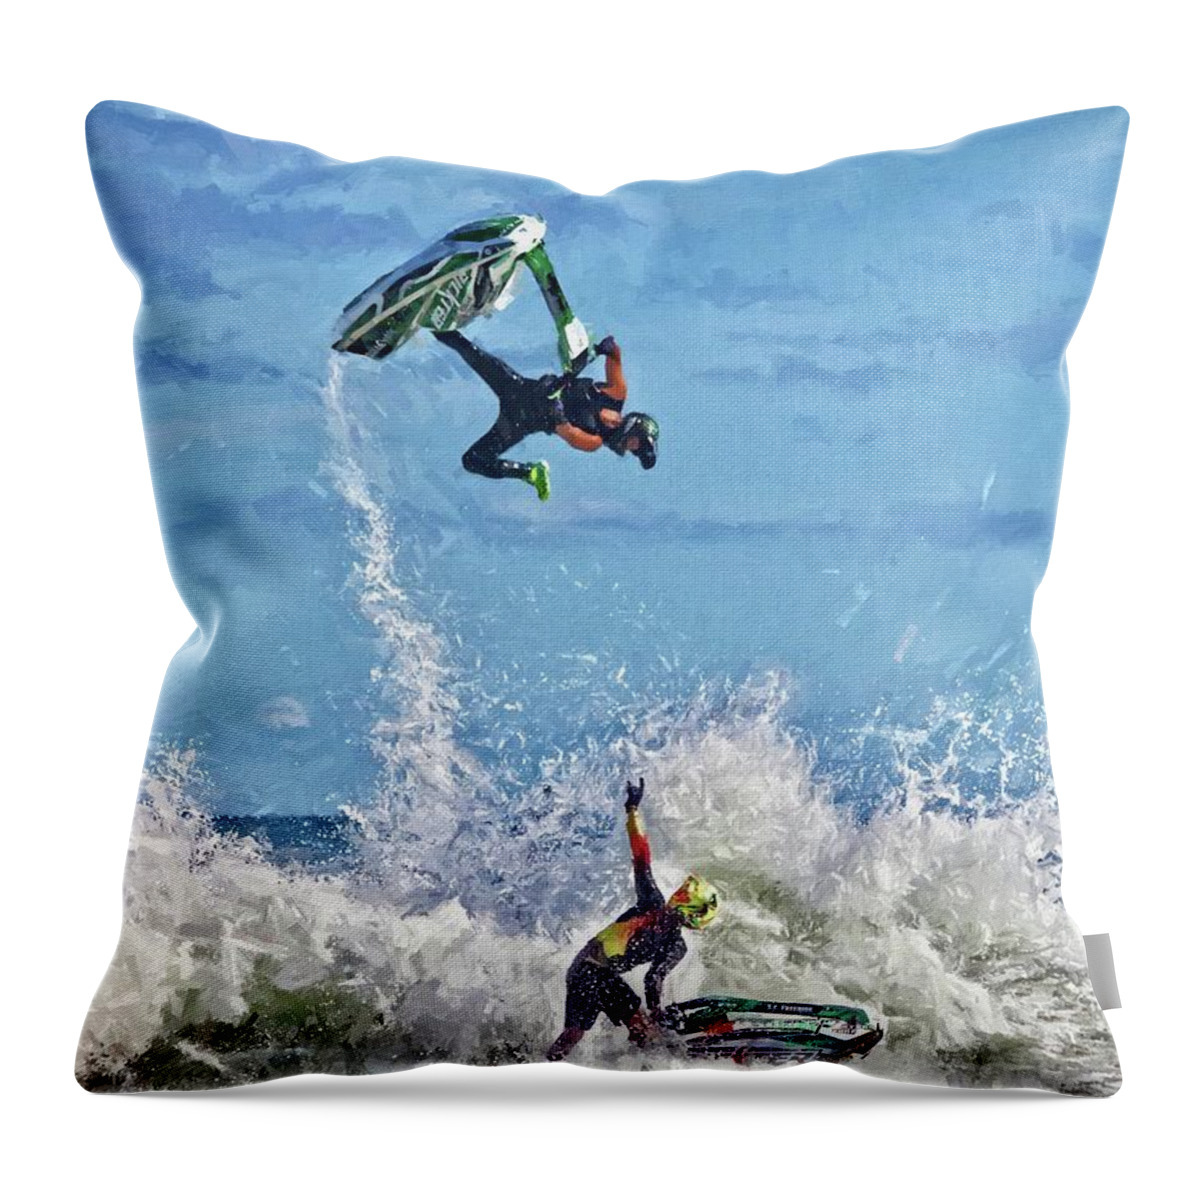 Alicegipsonphotographs Throw Pillow featuring the photograph Gotcha by Alice Gipson